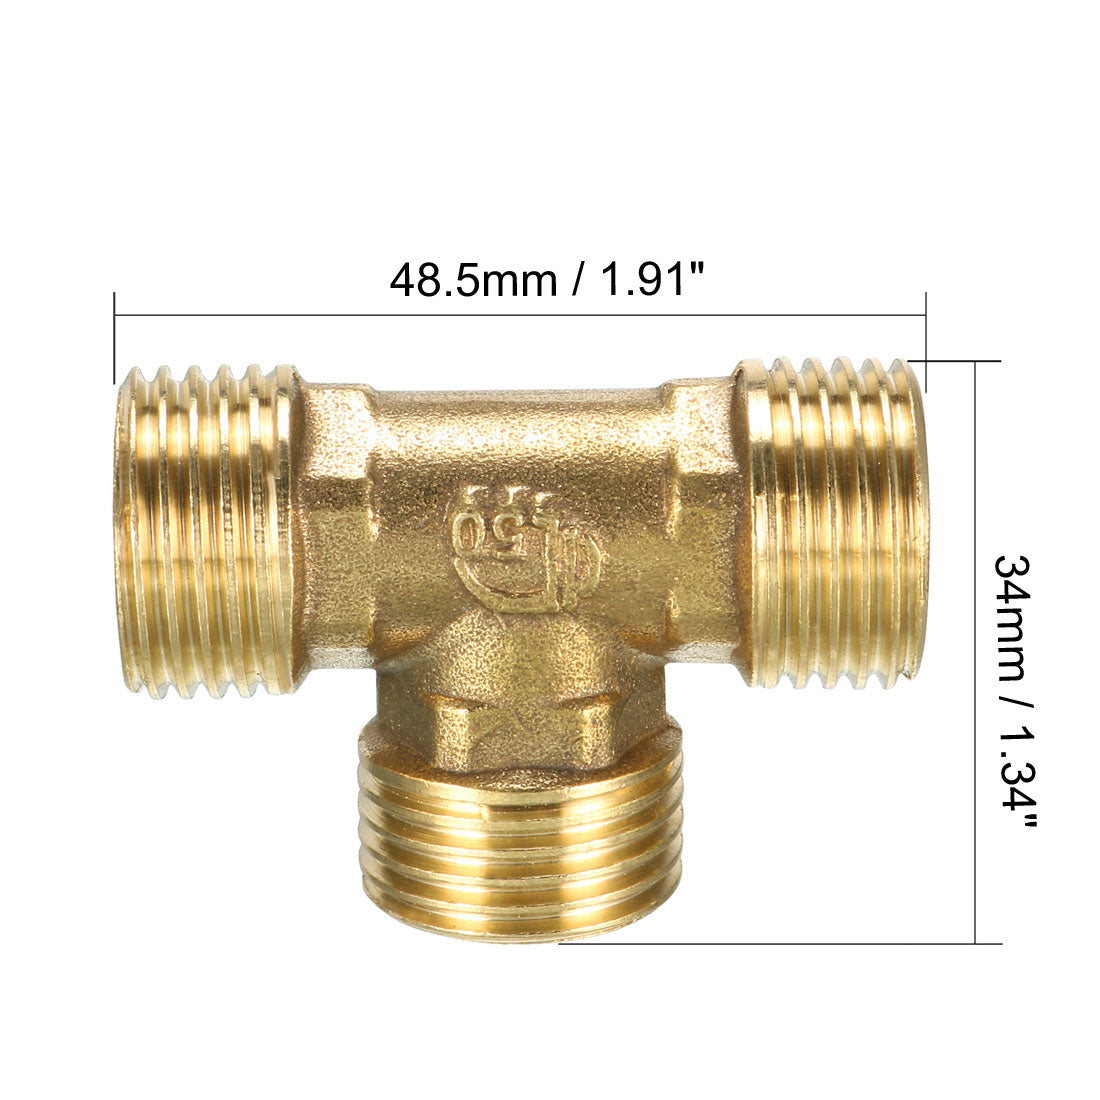 uxcell Uxcell Brass Tee Pipe Fitting 1/2 PT Male Thread T Shaped Connector Coupler 2pcs